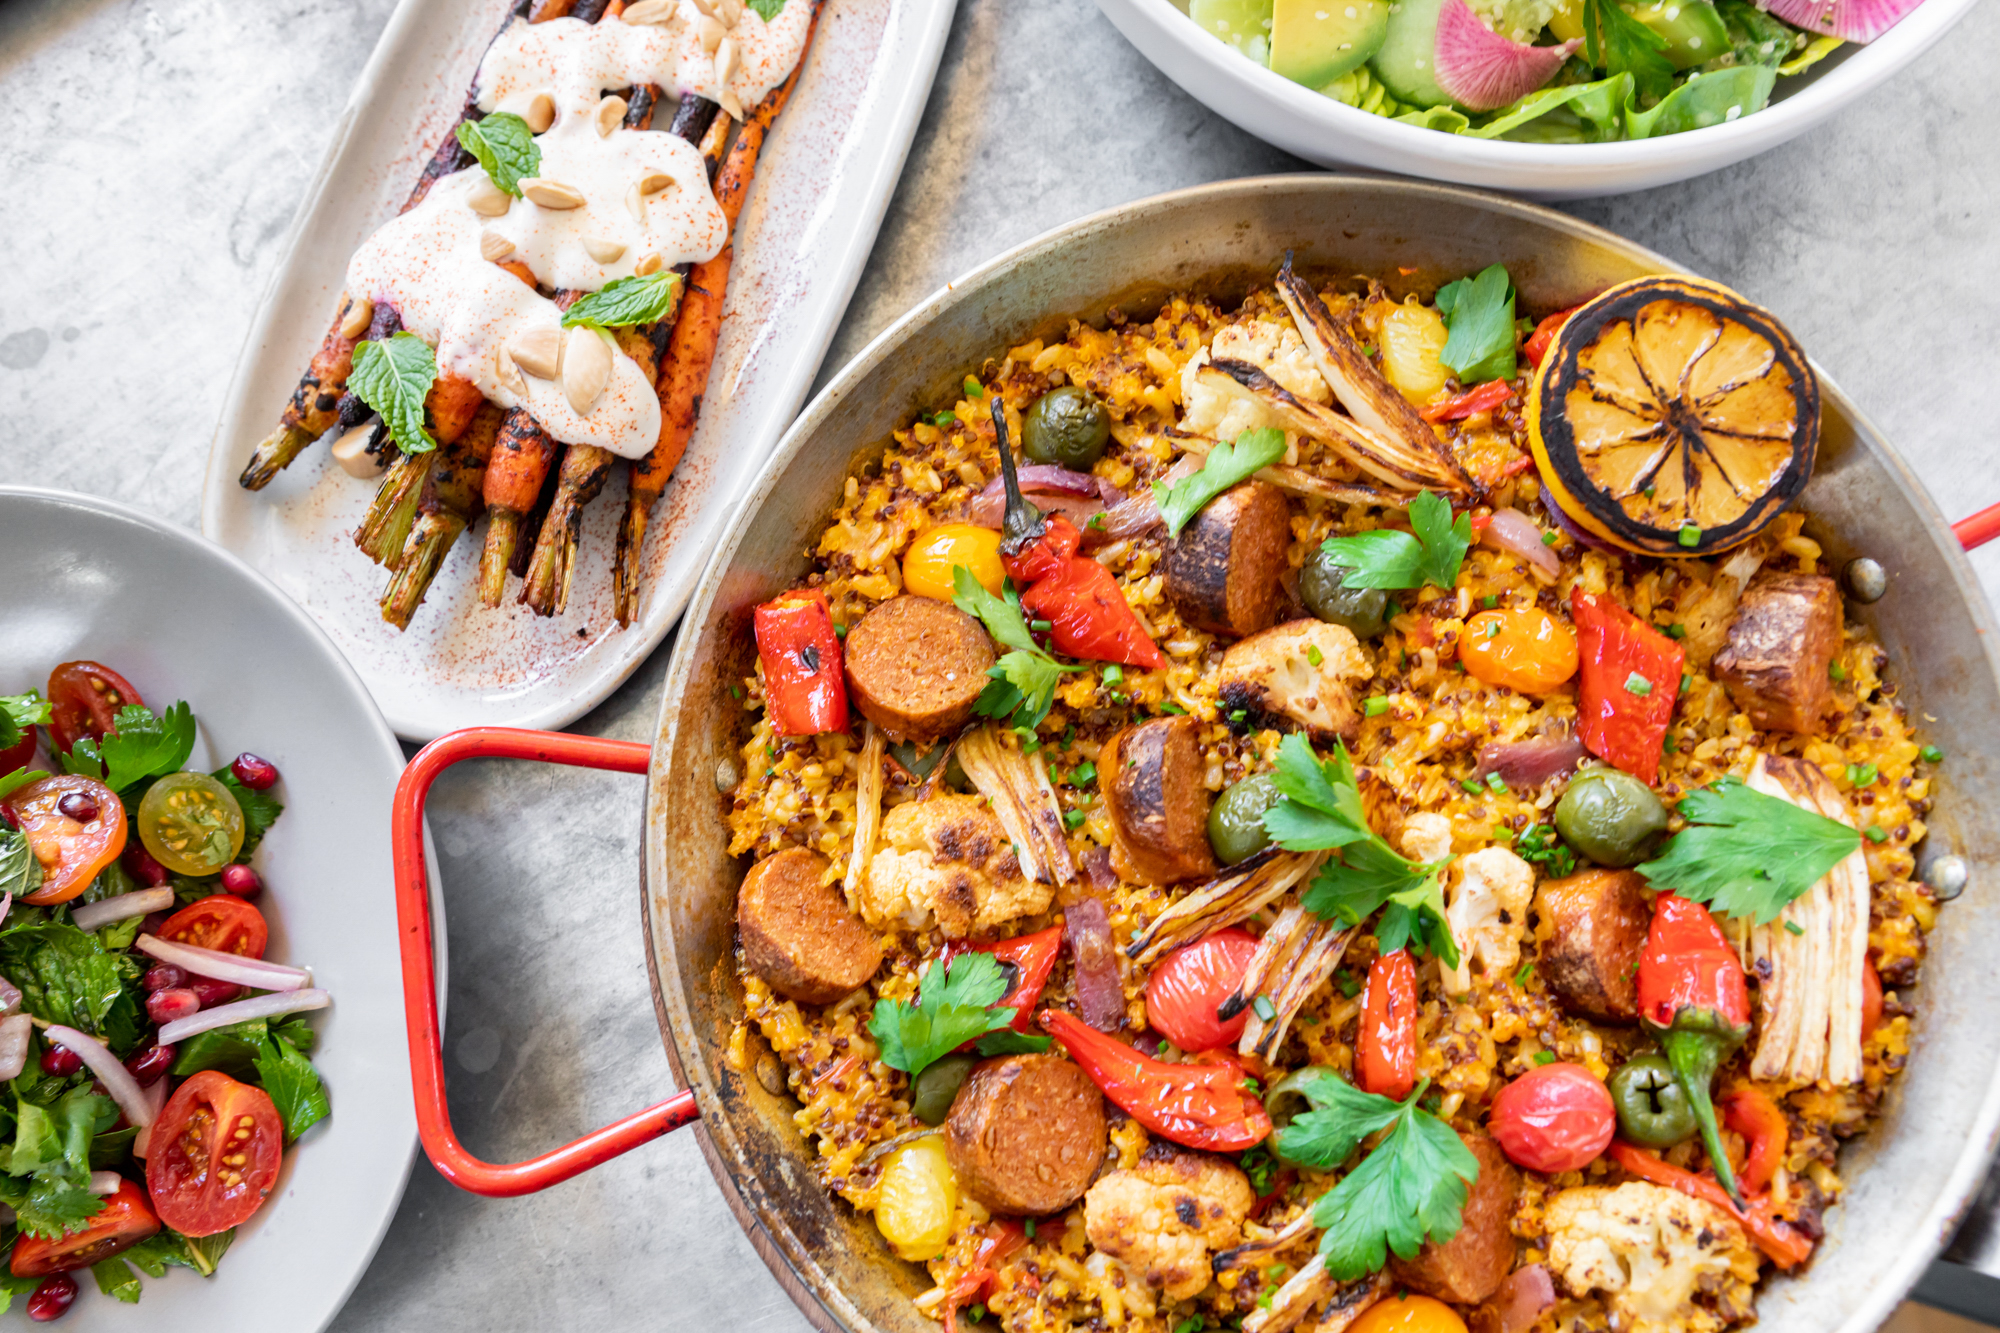 Paella for two.